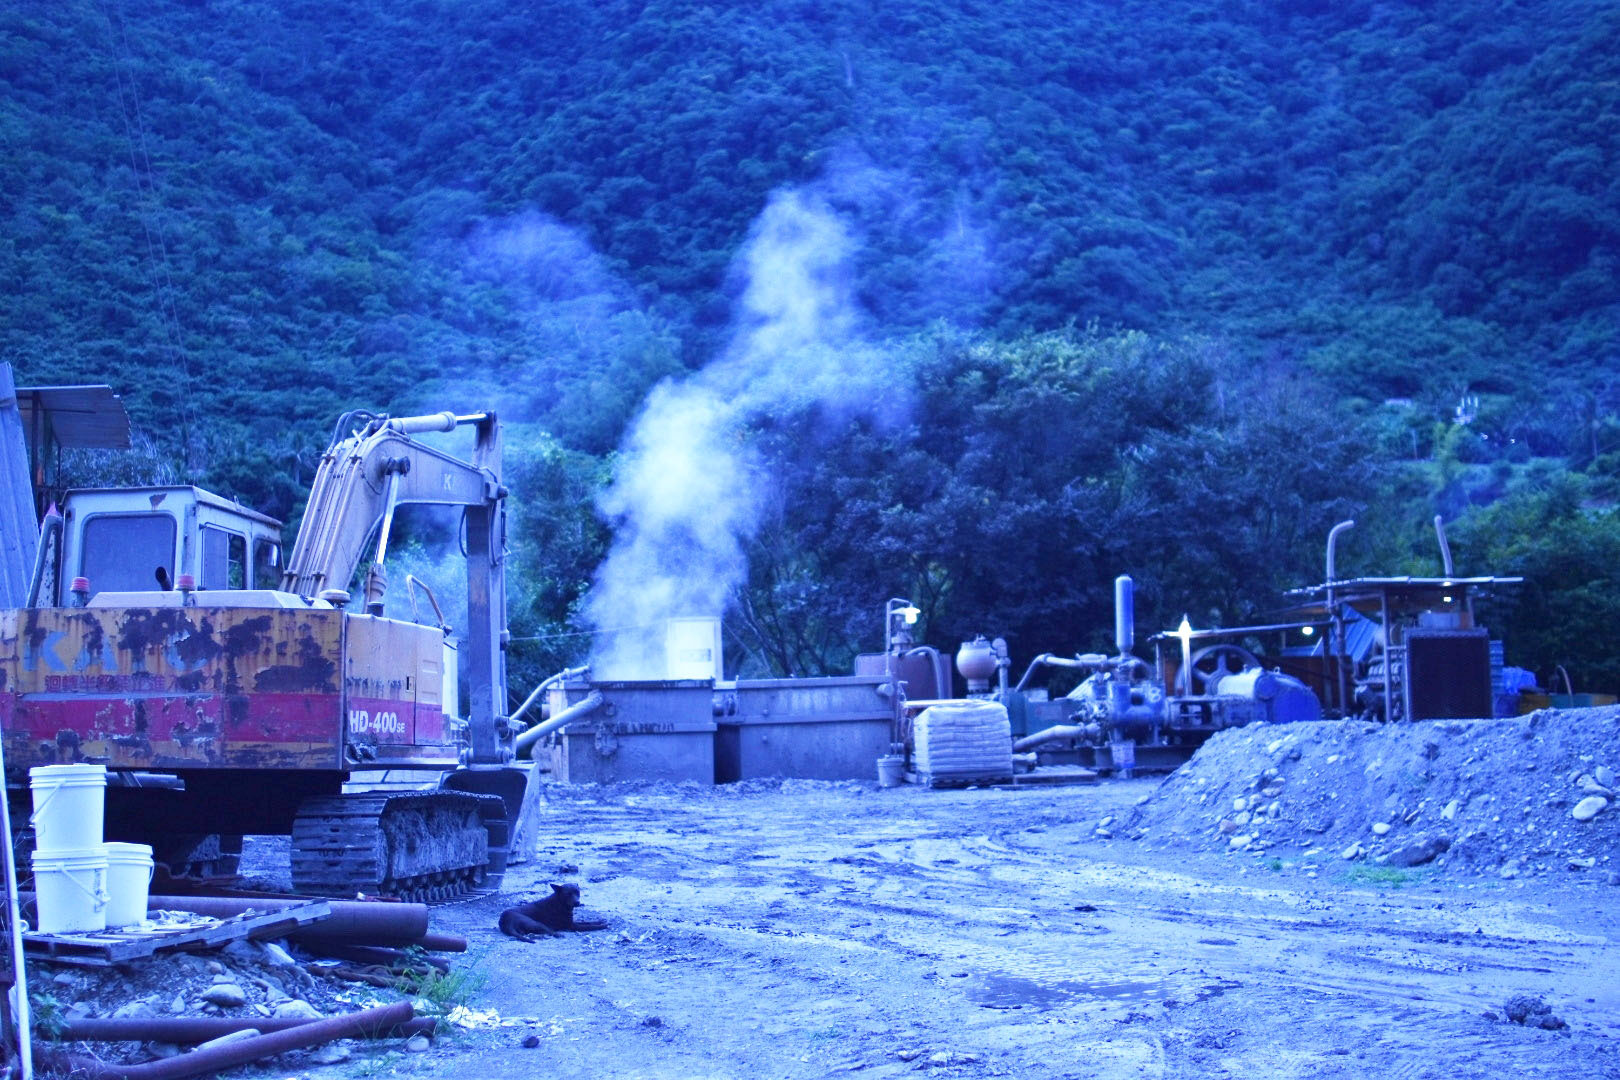 The view of Taimali-Chinlun Geothermal Area inspires Zeng.